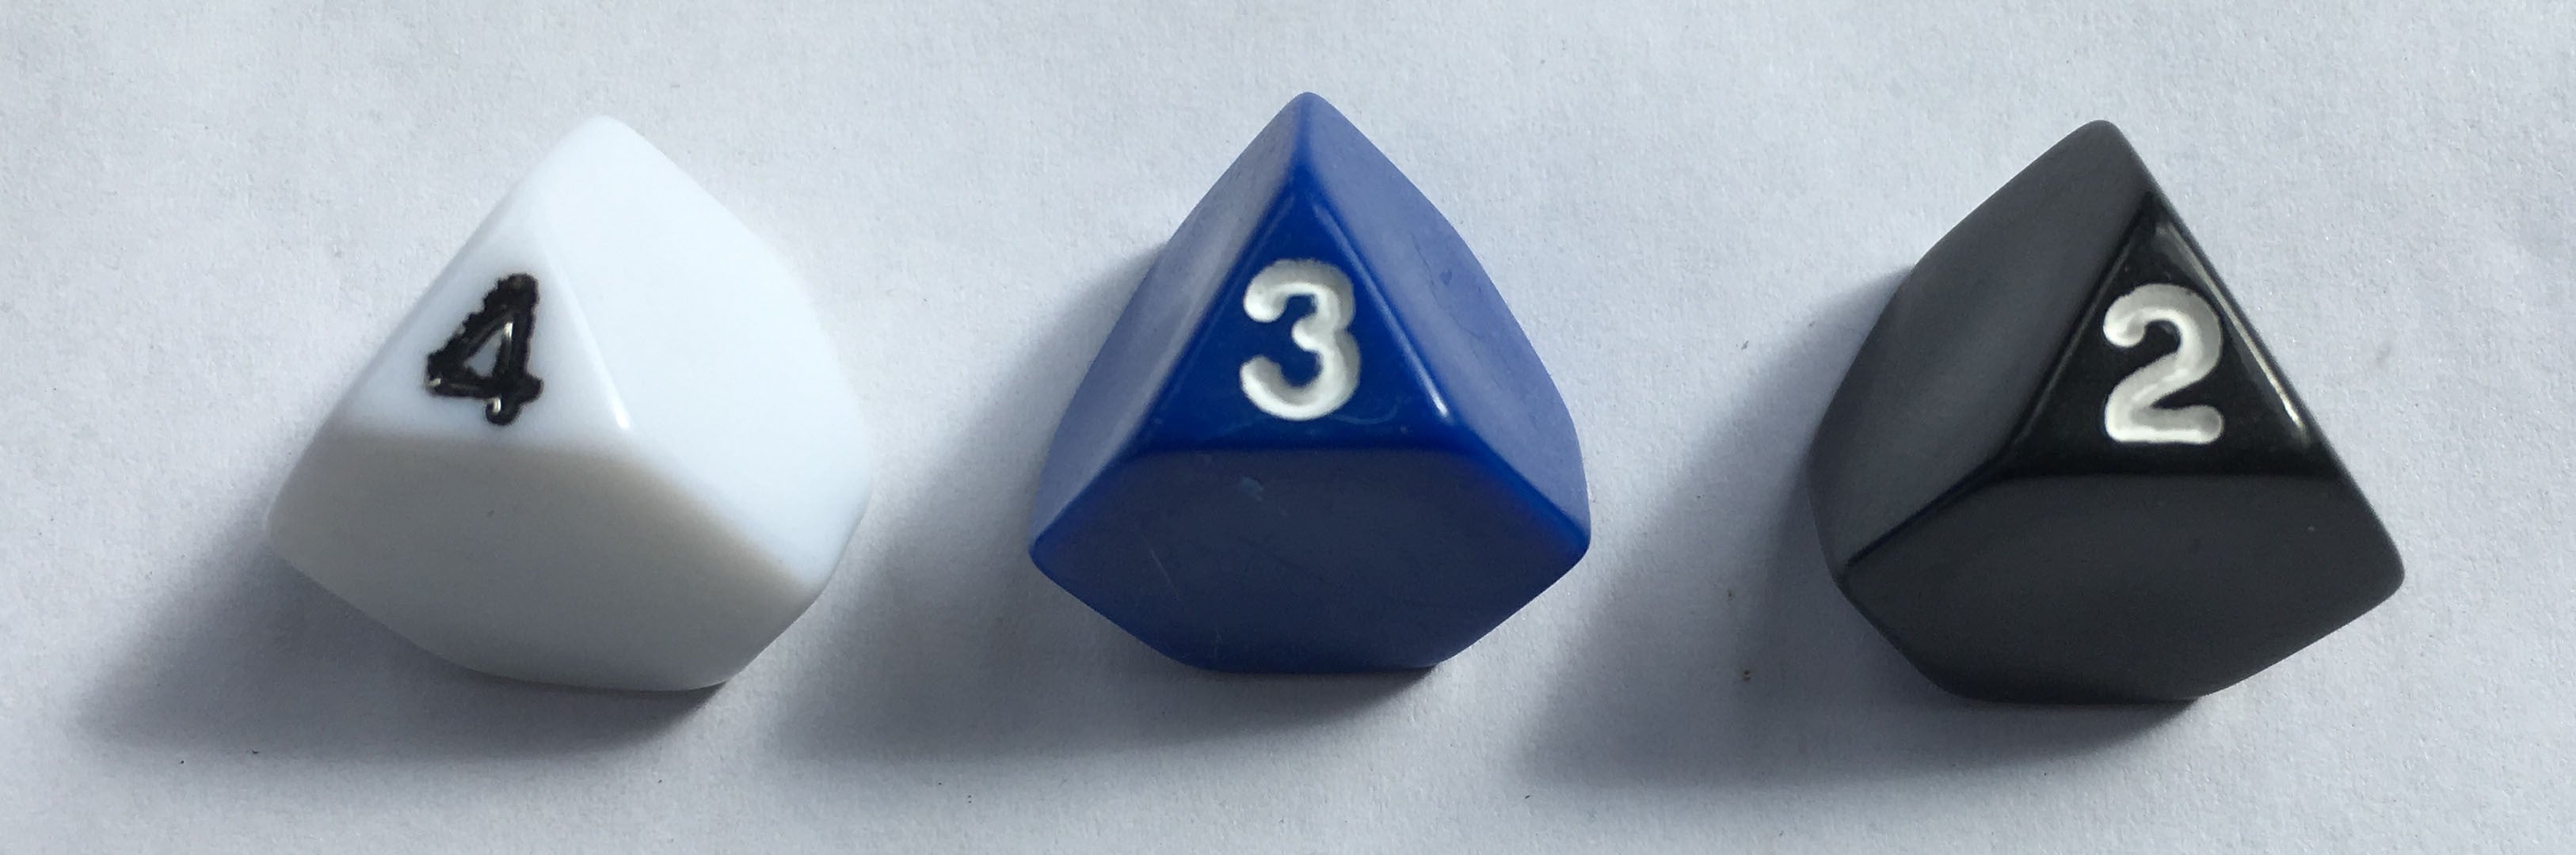 Dice - Truncated Four Sided - D4